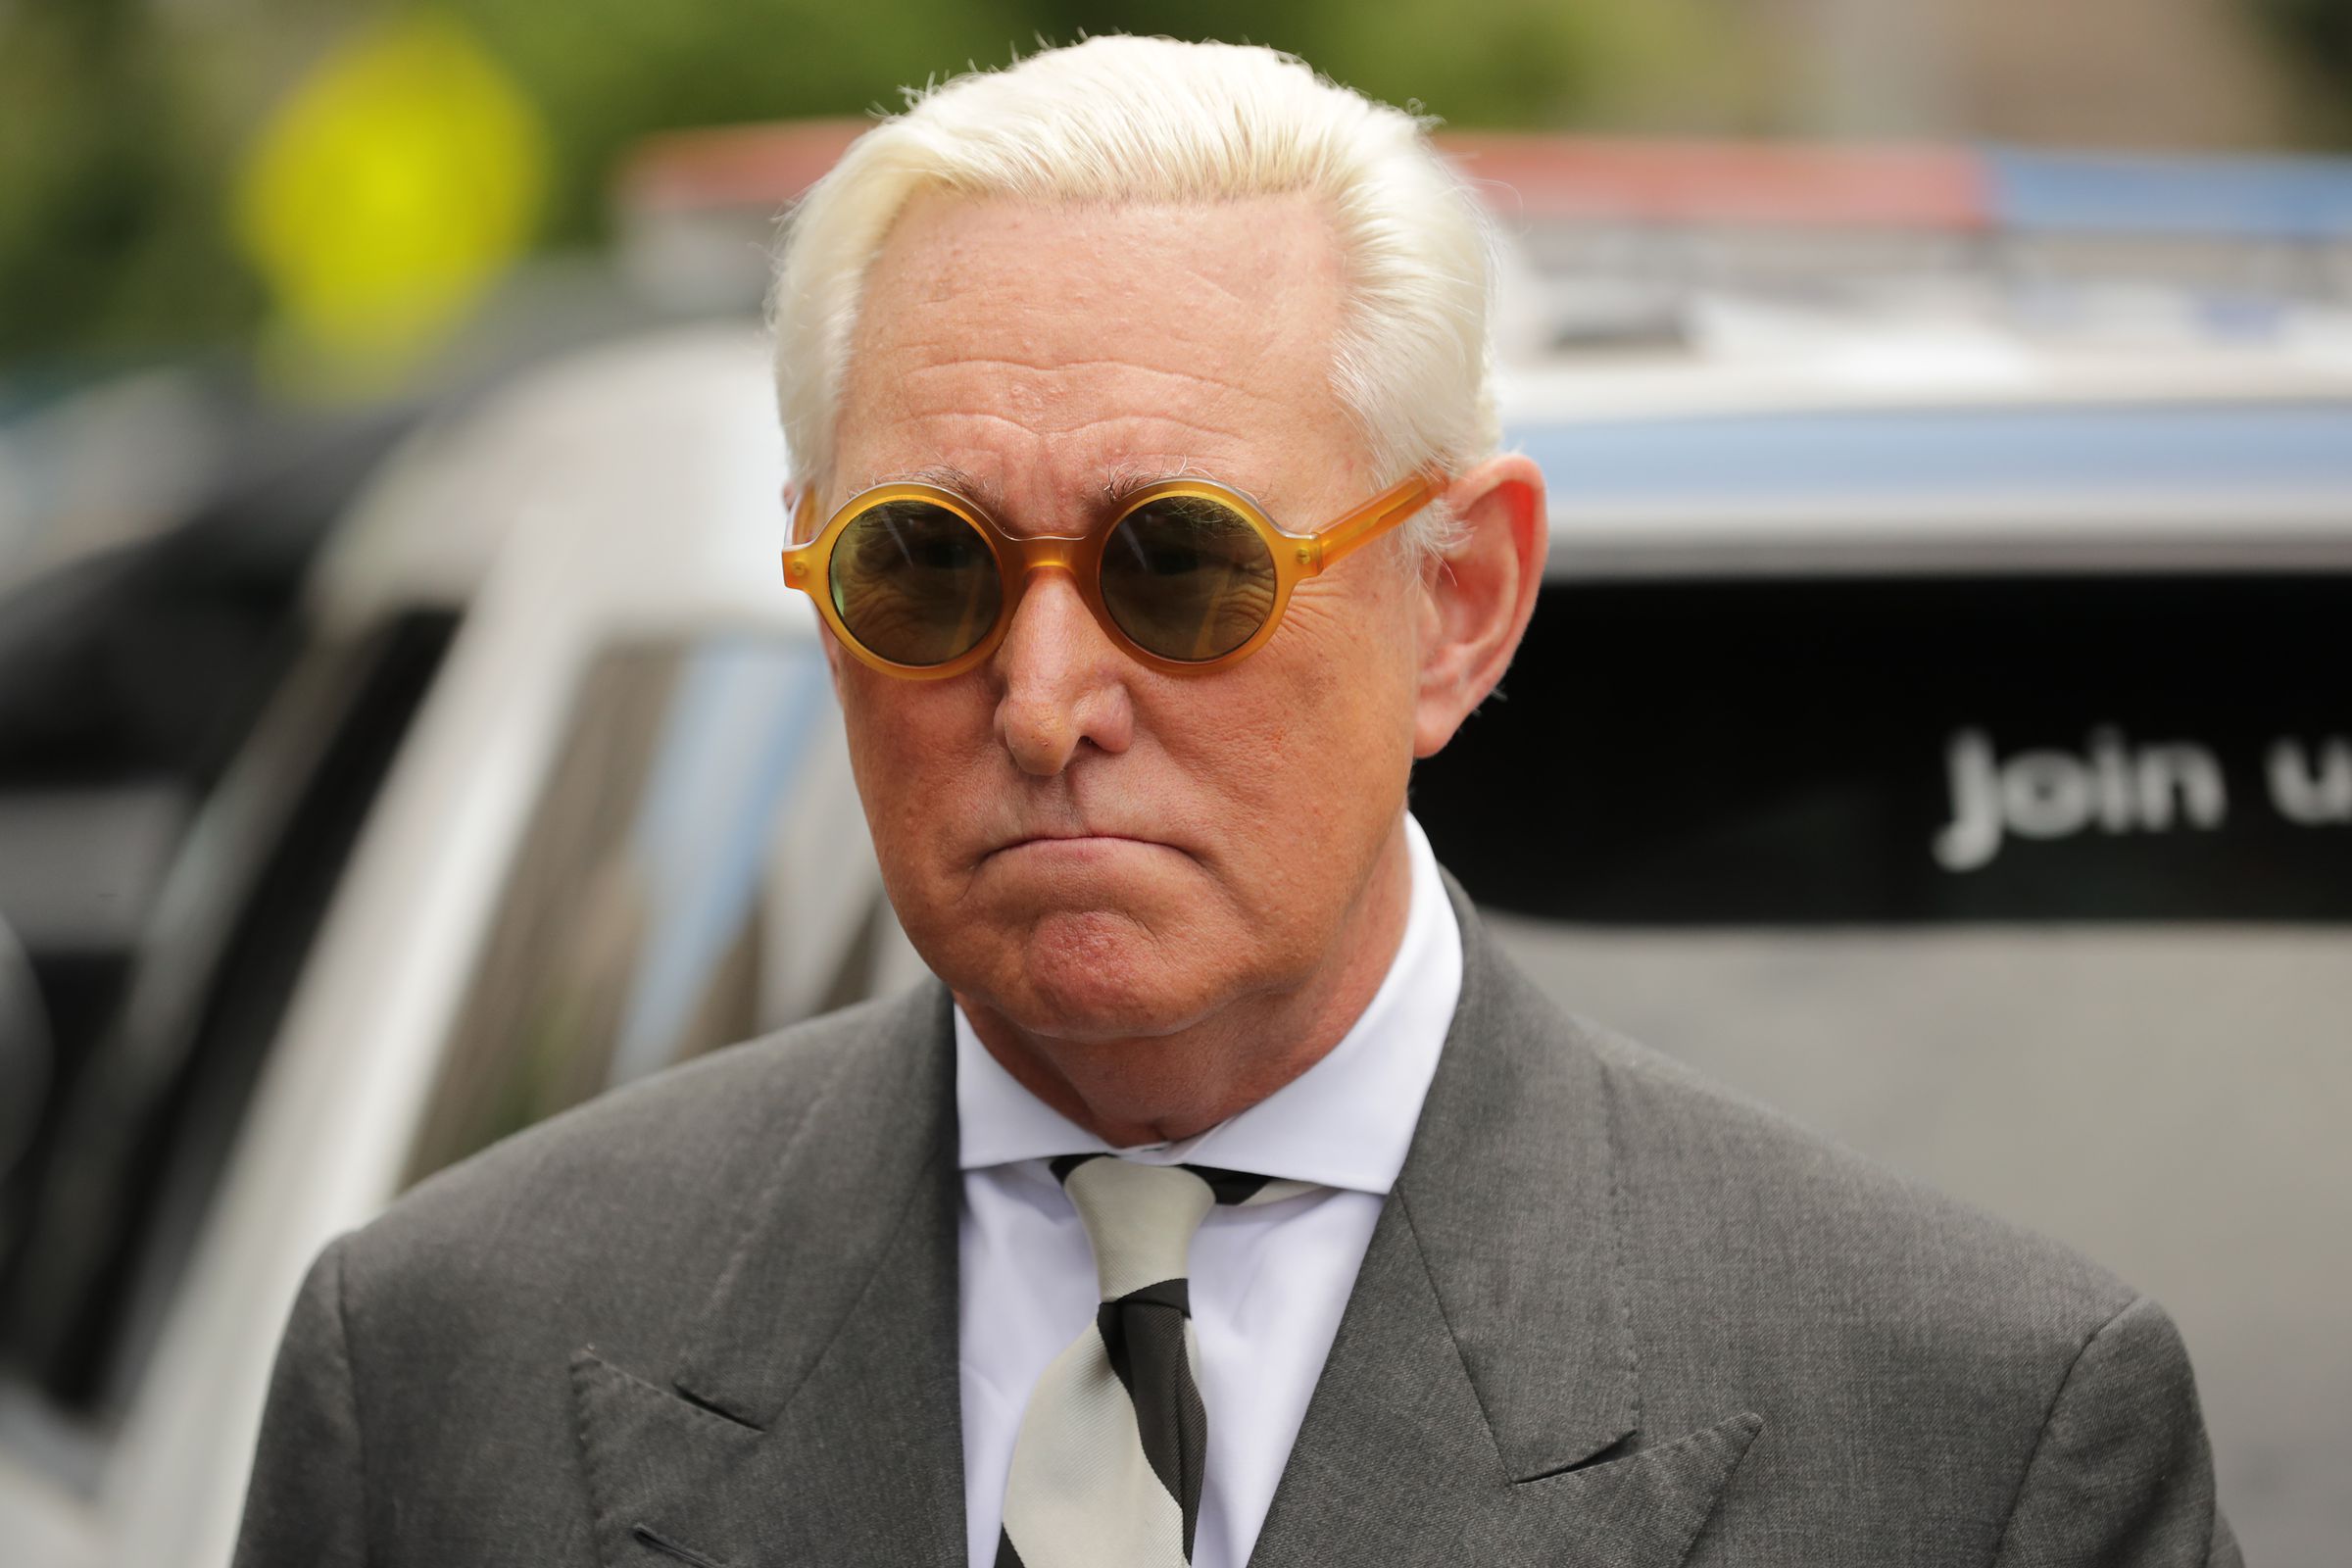 Trump Political Advisor Roger Stone Returns To Court In Effort To Dismiss Charges